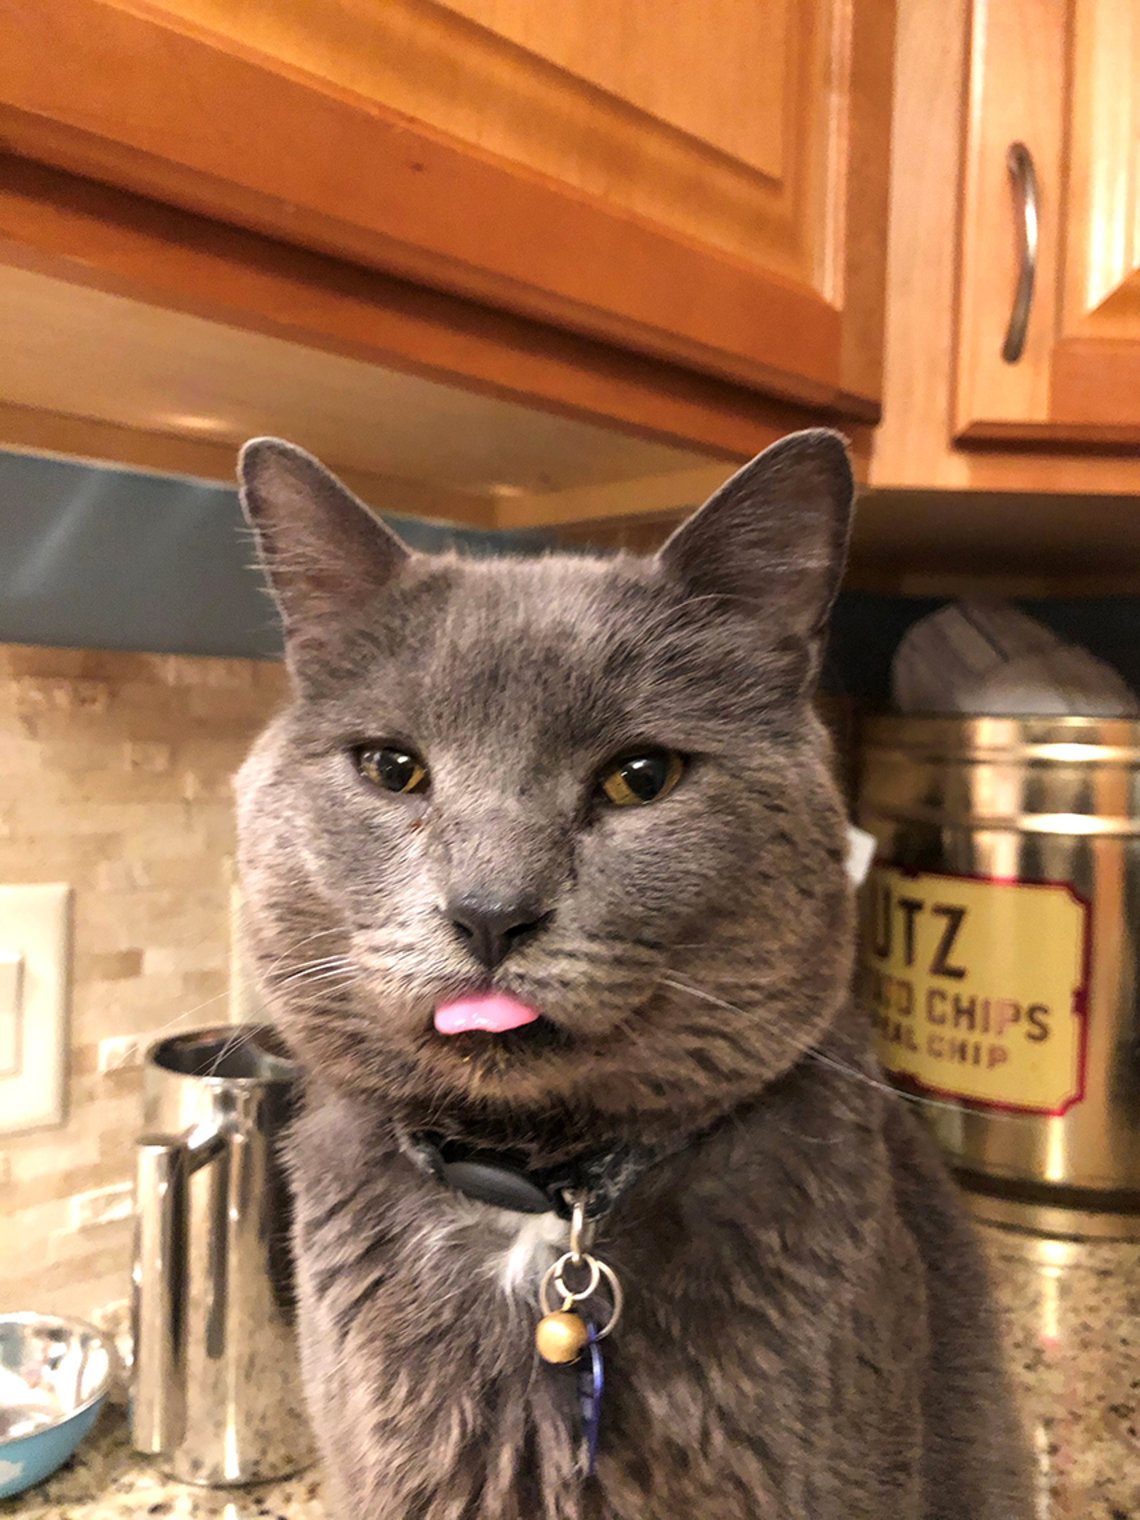 A cat sticks out his tongue